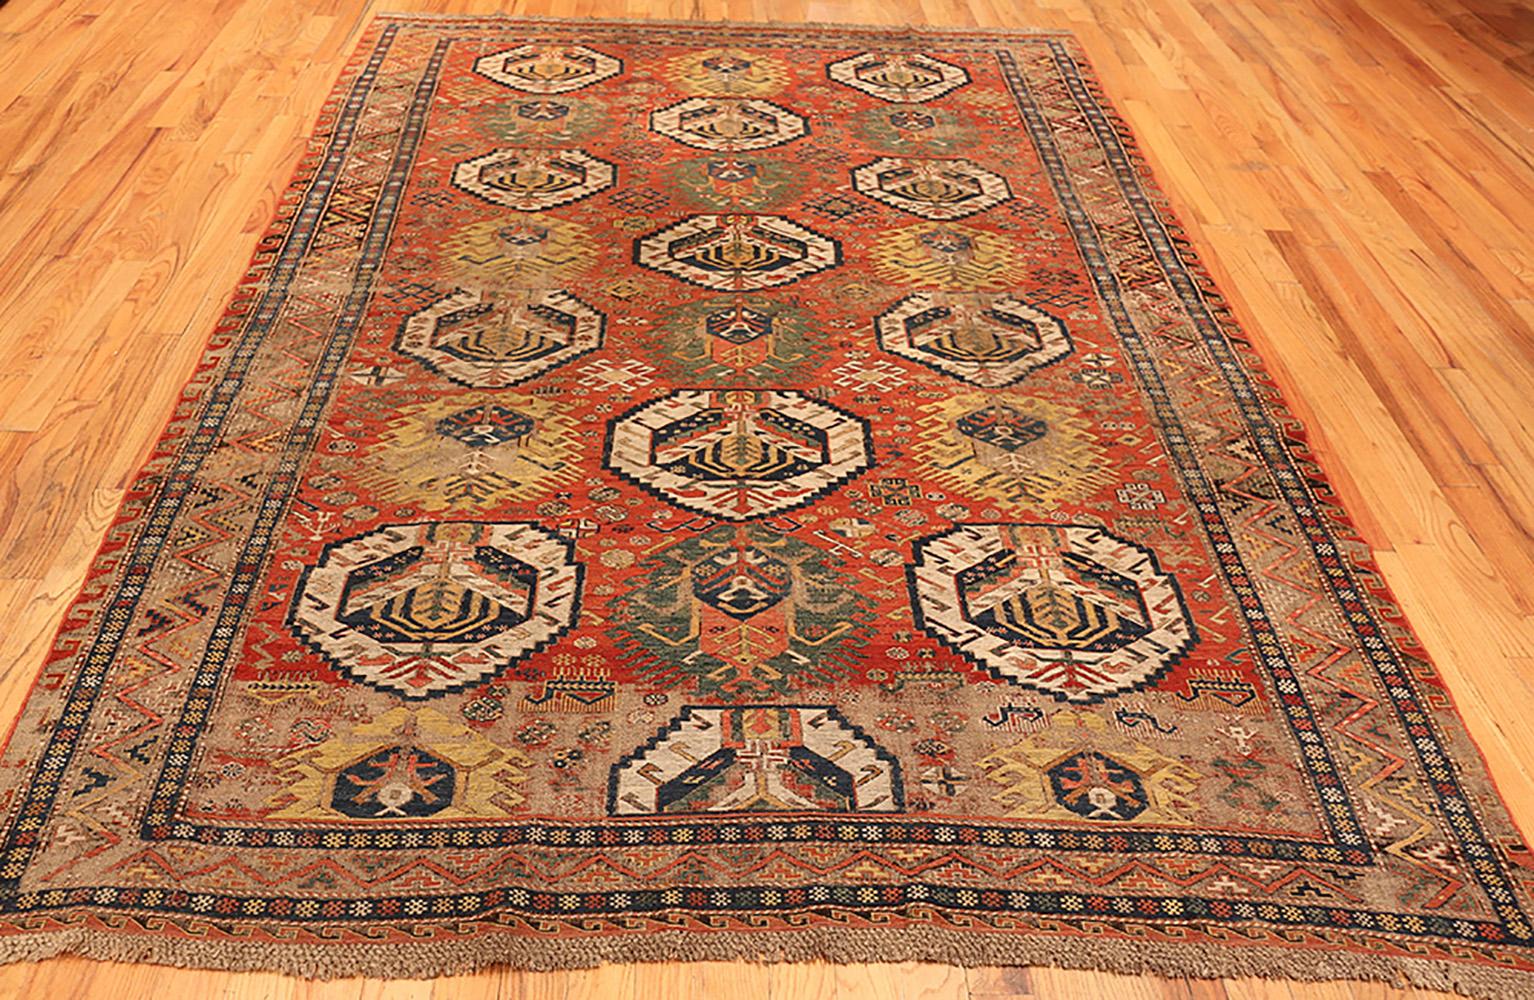 Antique Shabby Chic Tribal Caucasian Soumak. Size: 7 ft 4 in x 10 ft 3 in 2